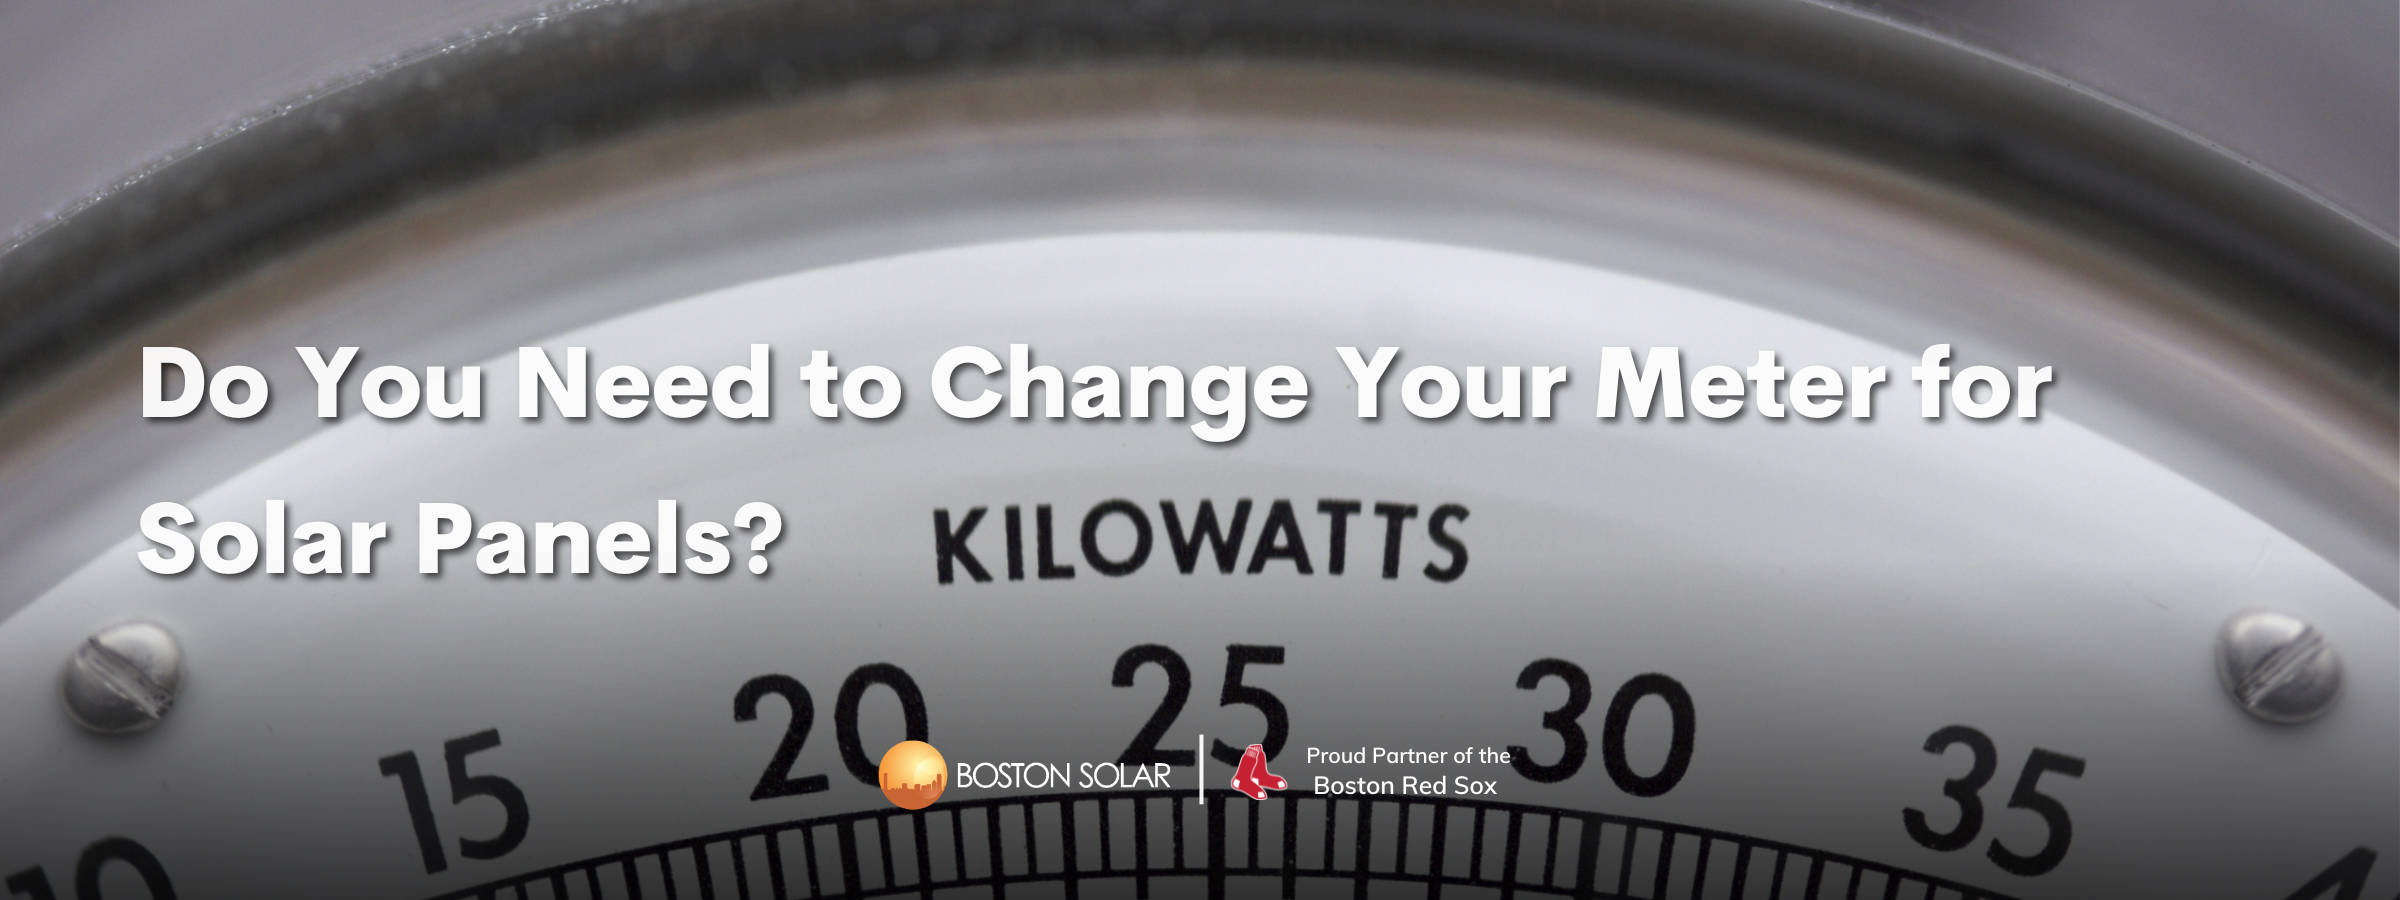 Do You Need to Change Your Meter for Solar Panels